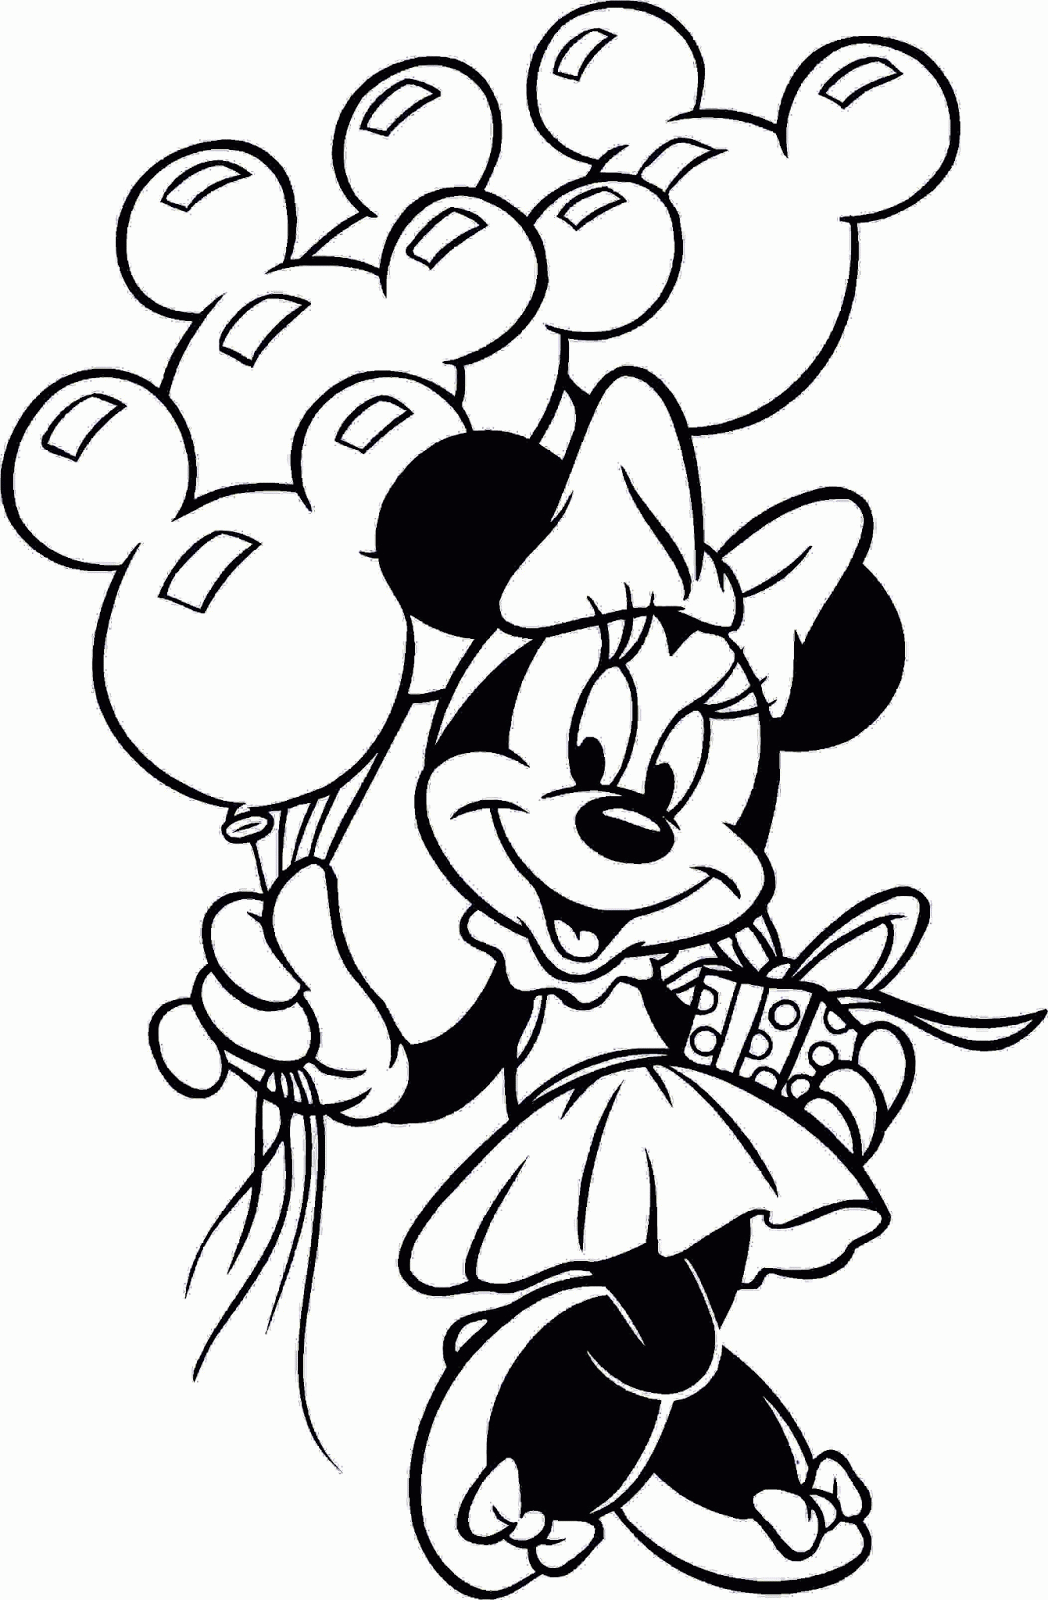 Printable 22 Mickey Mouse Birthday Coloring Pages 5745 ...